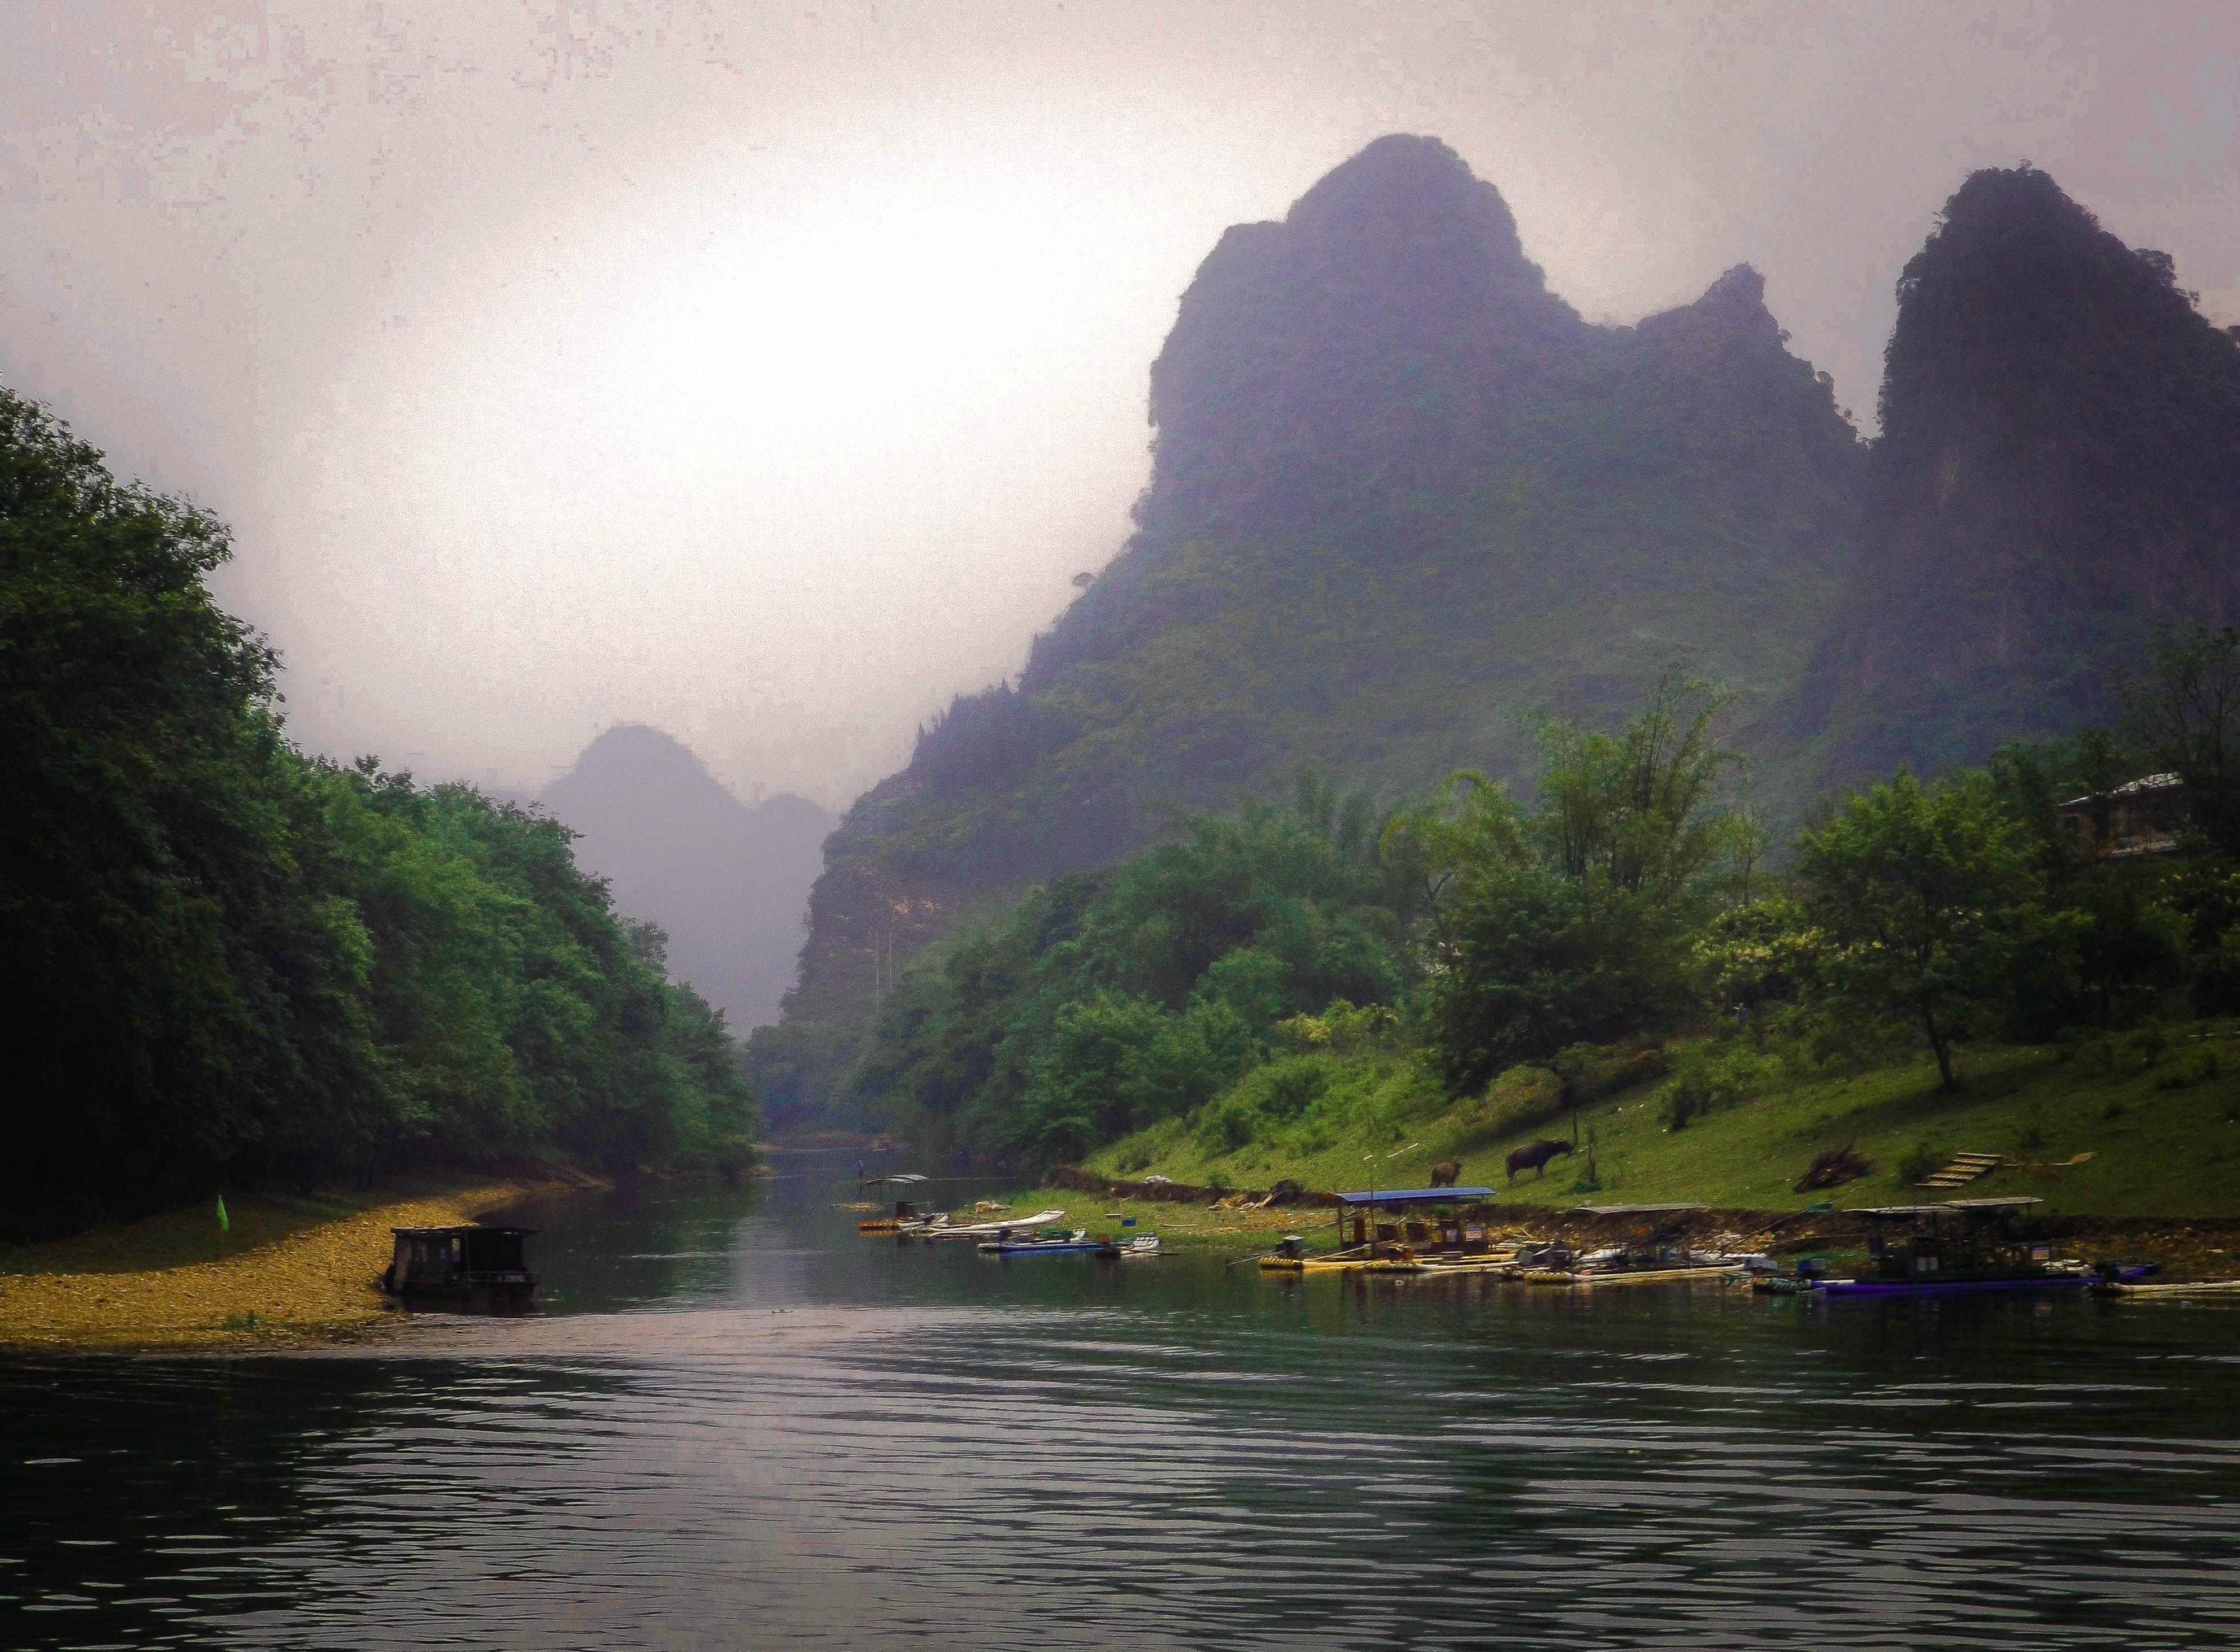 Guilin 4K wallpaper for your desktop or mobile screen free and easy to download